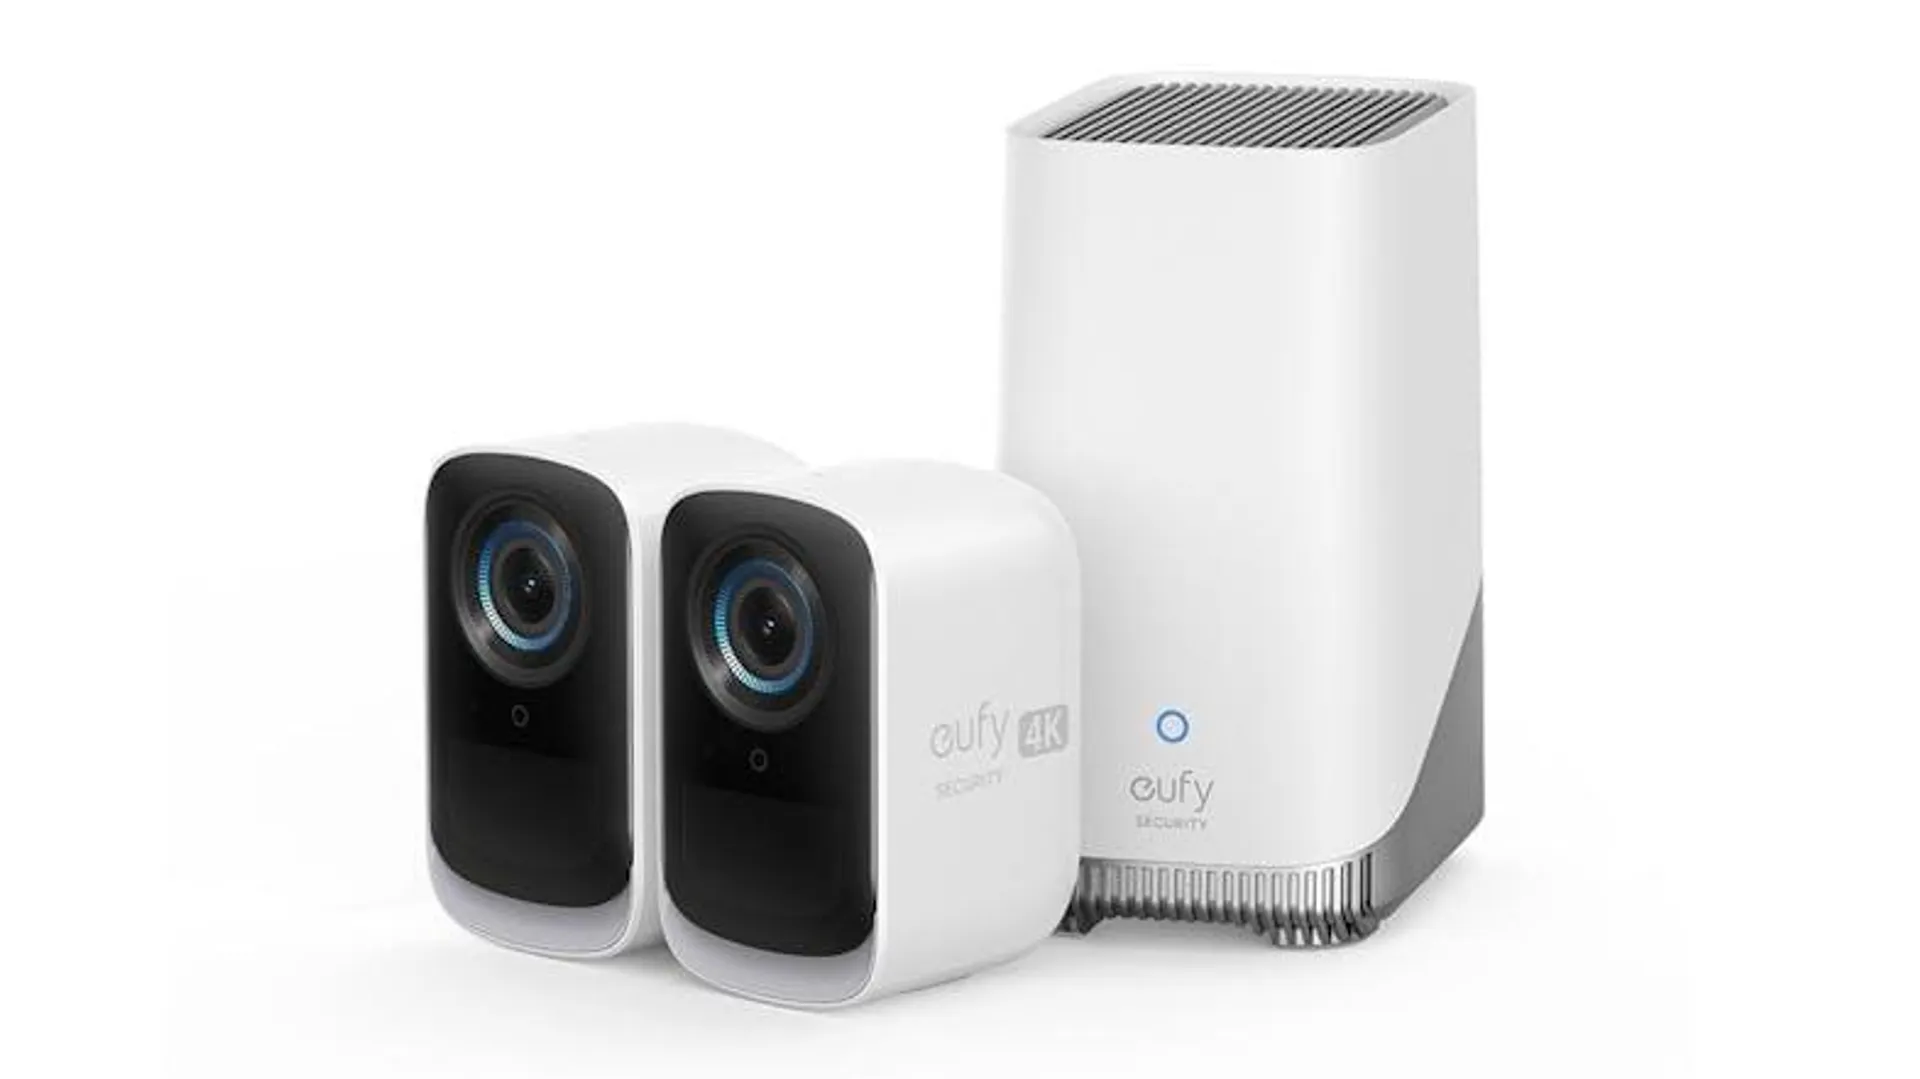 Eufy Cam 3C S300 4K Outdoor Wireless Smart Security Camera - 2 Pack with HomeBase3 (White)